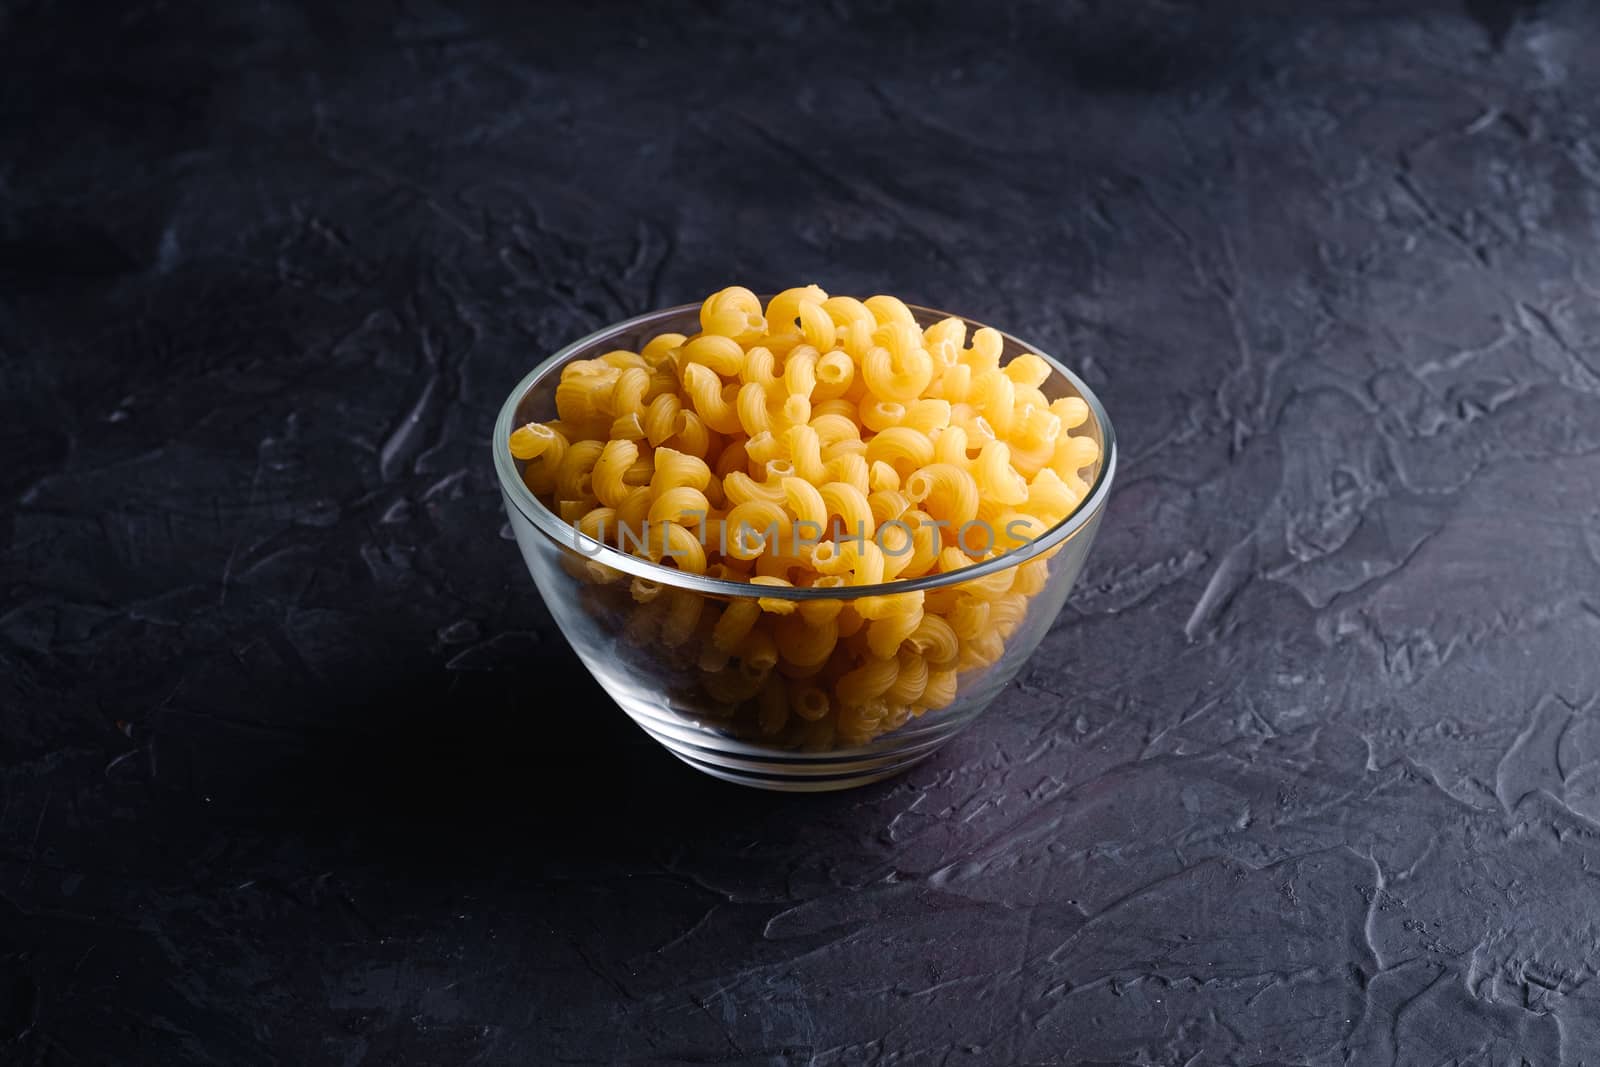 Glass bowl with cavatappi uncooked golden wheat curly pasta on textured dark black background, angle view